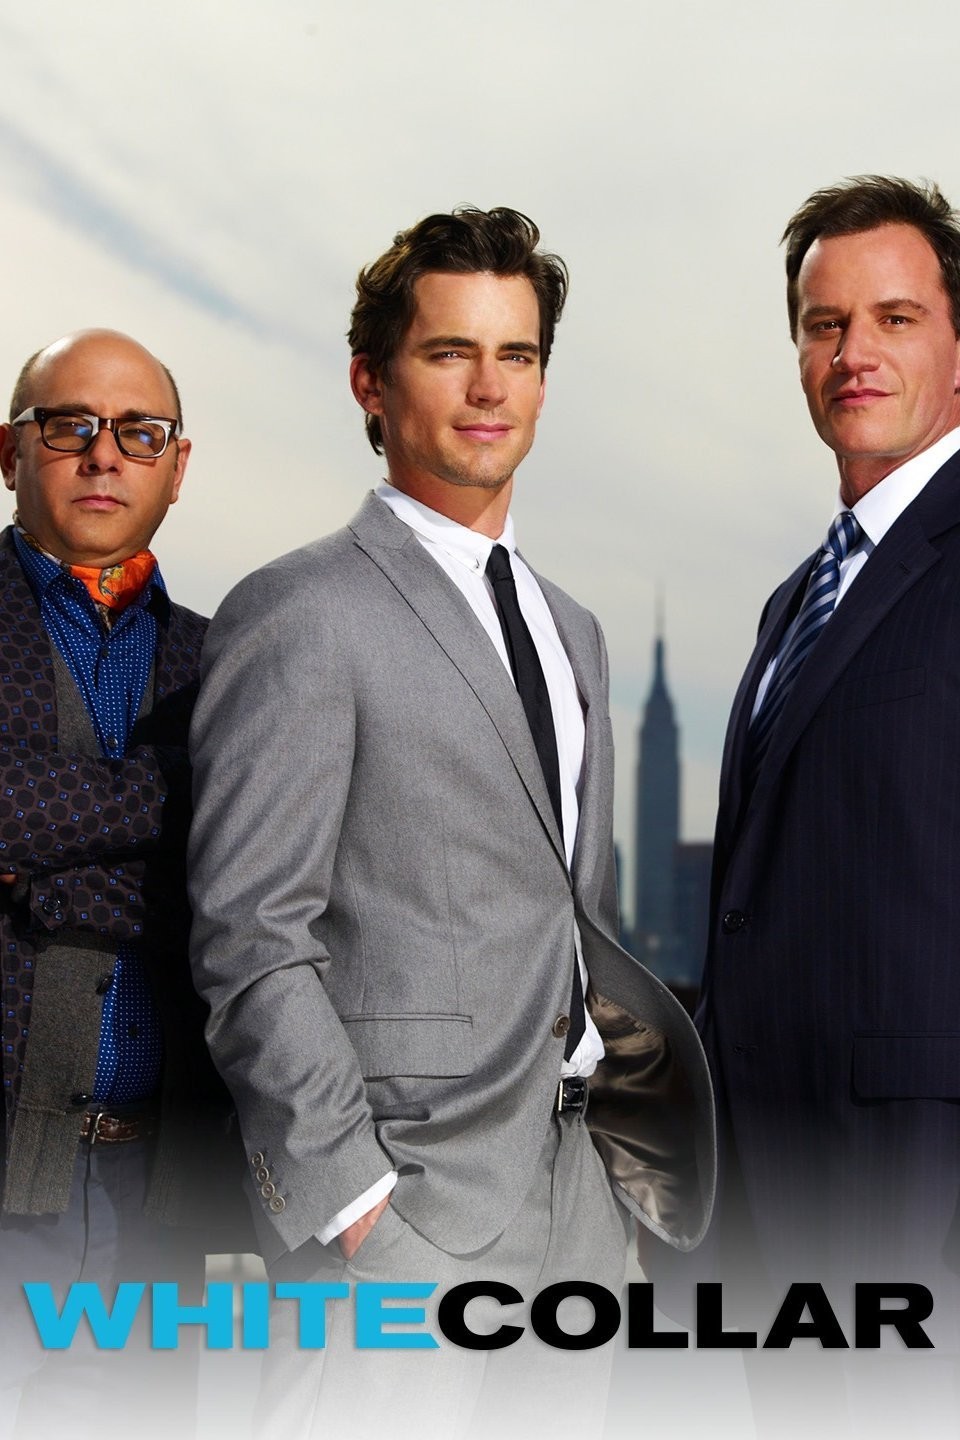 White Collar Review: Where There's a Will - TV Fanatic